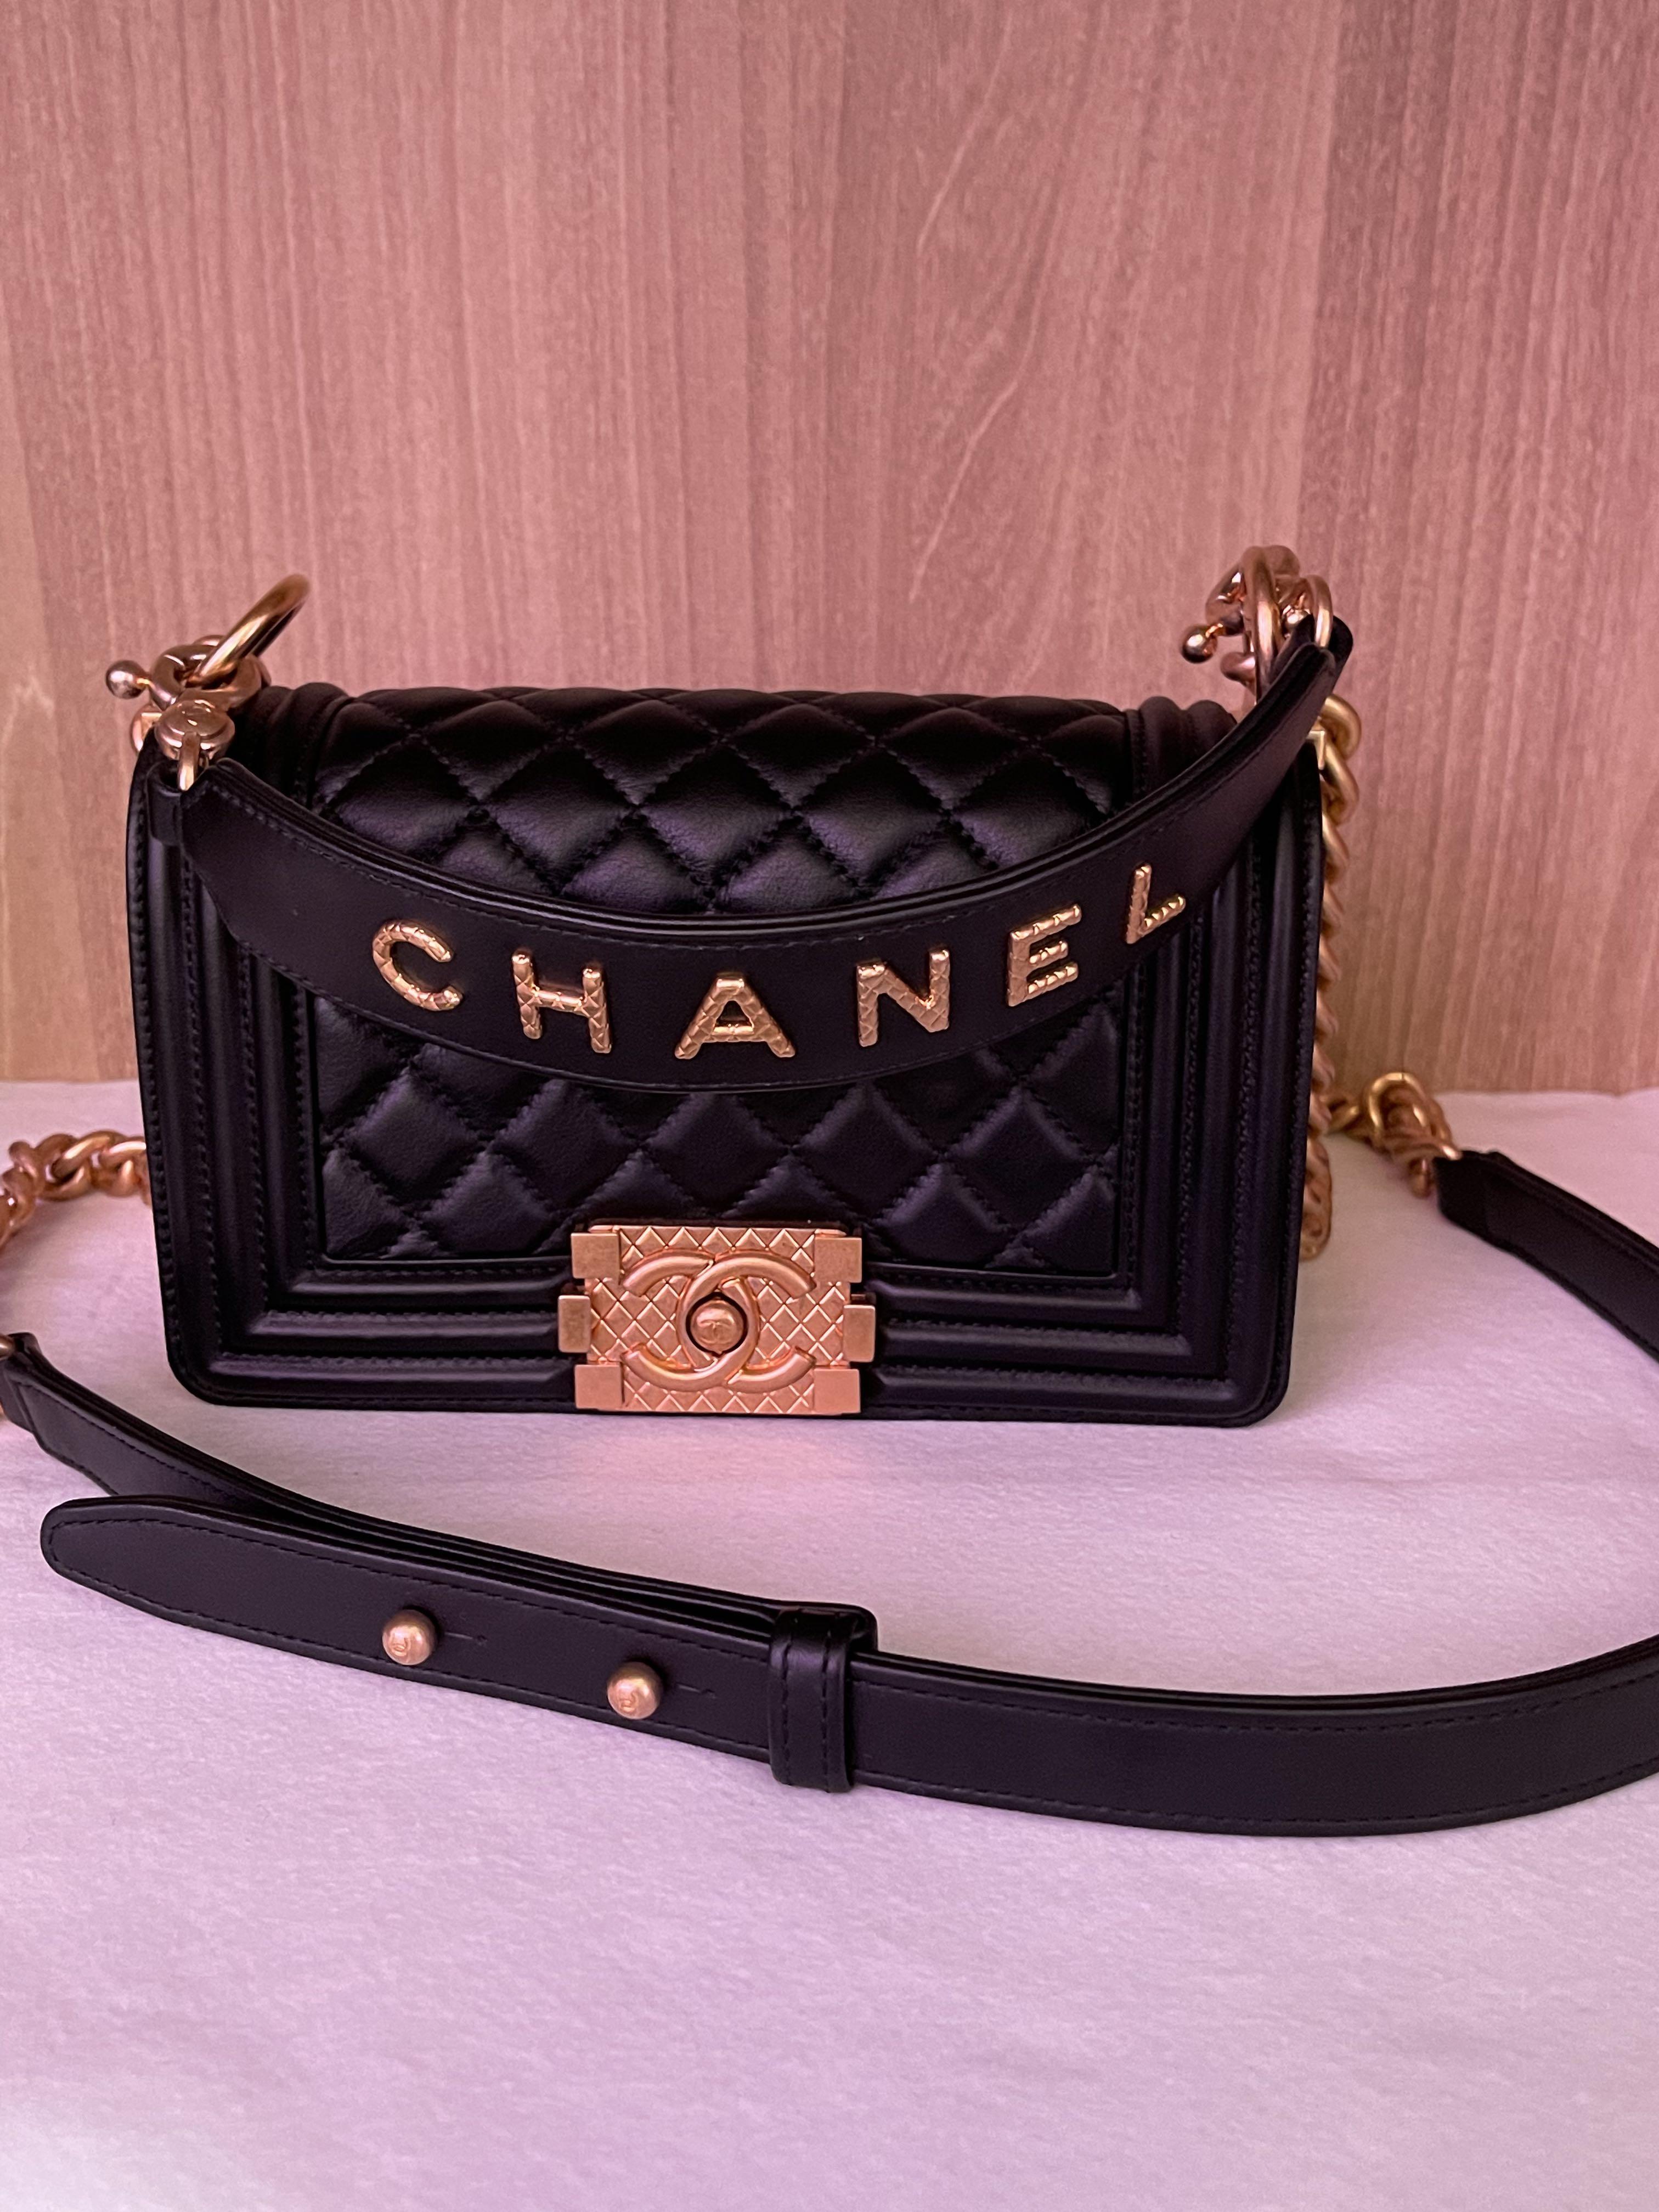 These New Chanel Flap Bags Come With A Wooden Handle - BAGAHOLICBOY